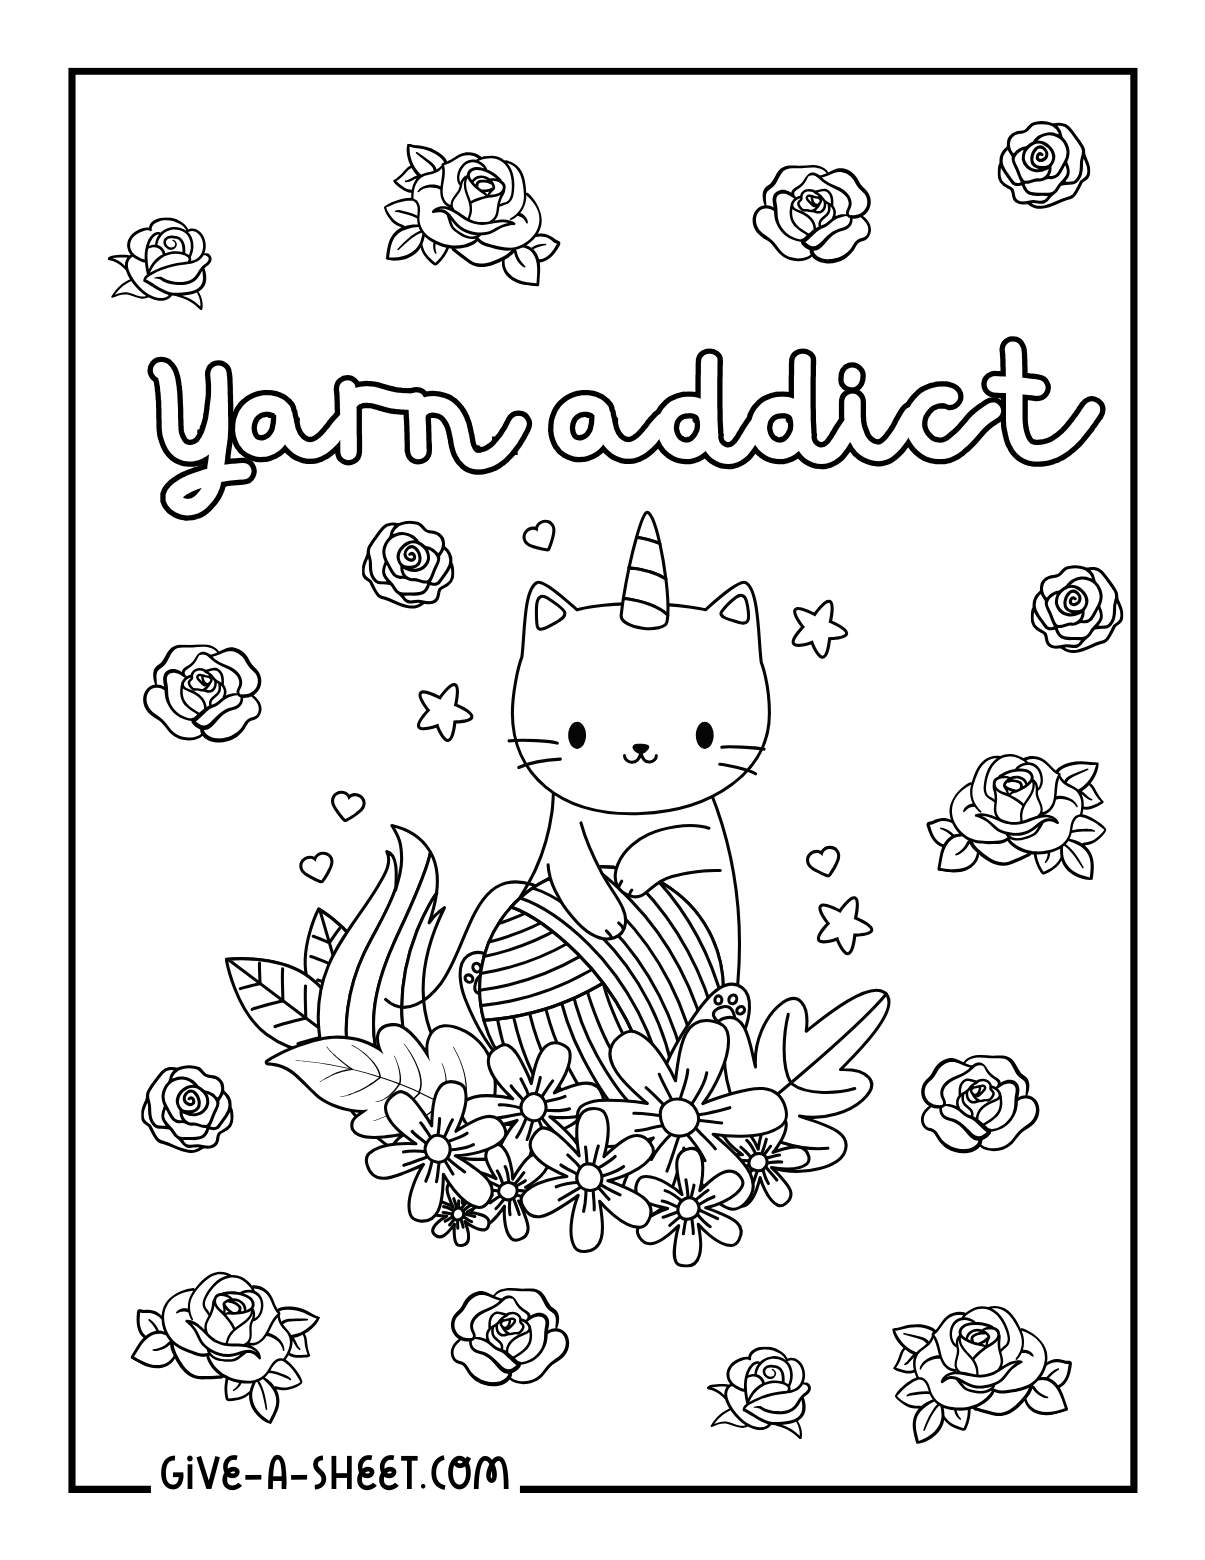 Cute cat knitting coloring page for kids.